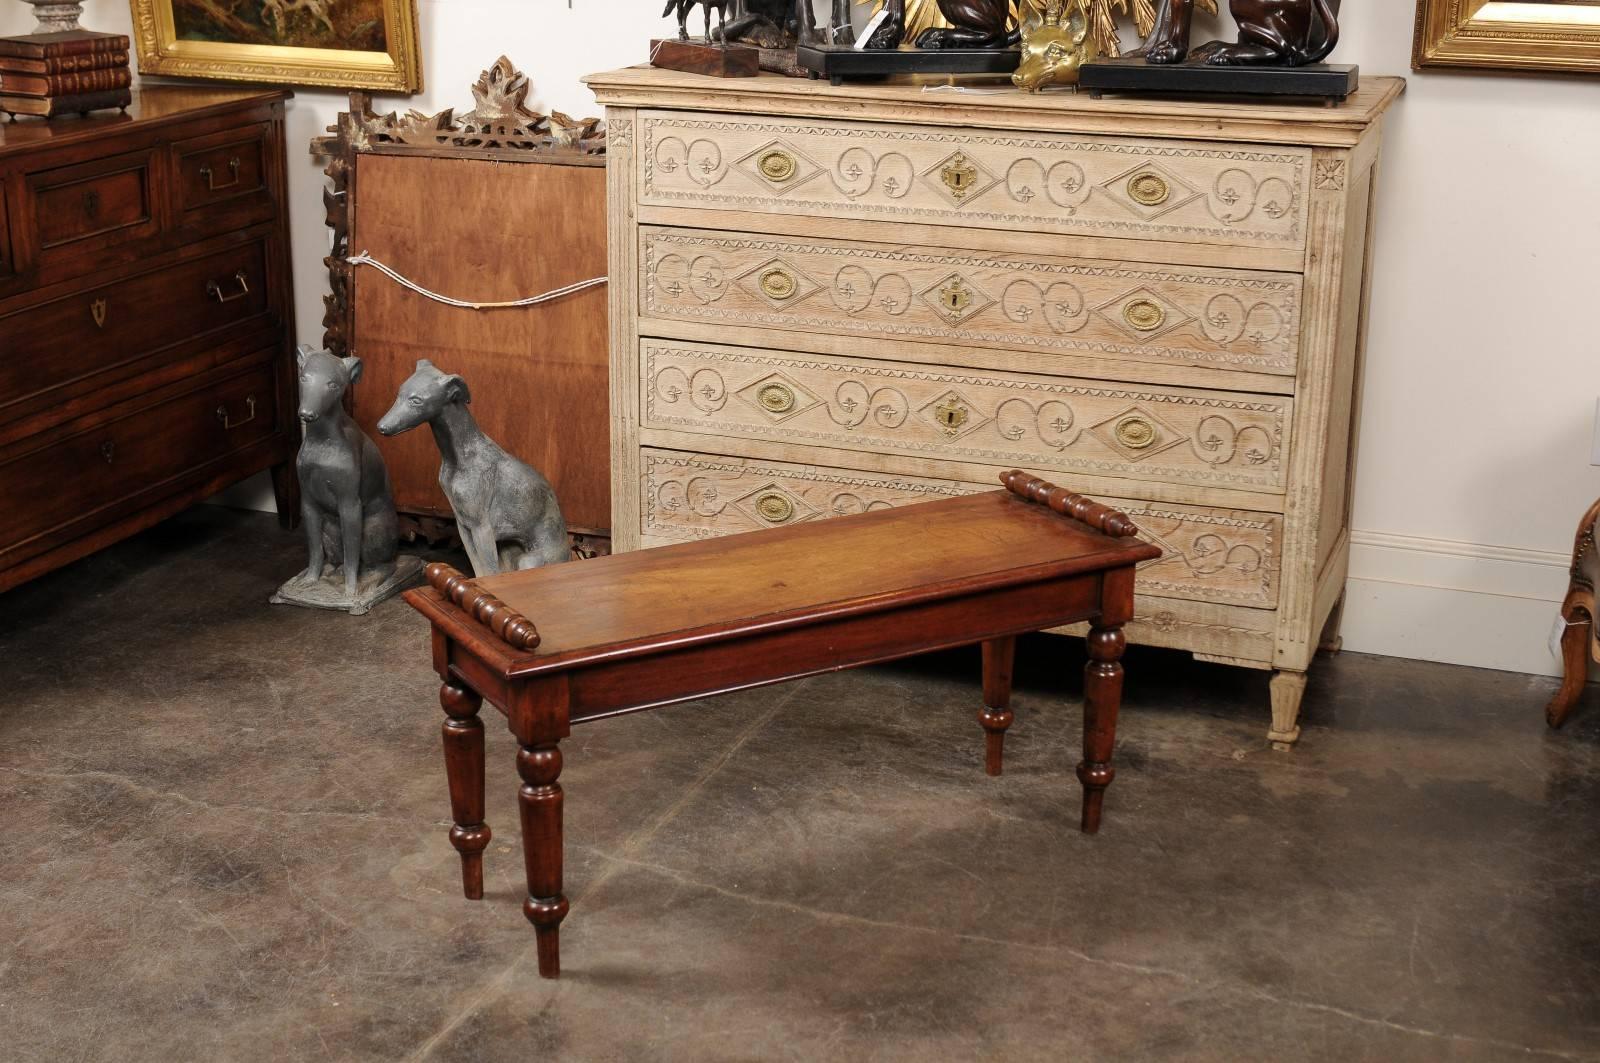 Carved English 1880s Mahogany Hall Bench with Wooden Seat, Turned Arms and Legs